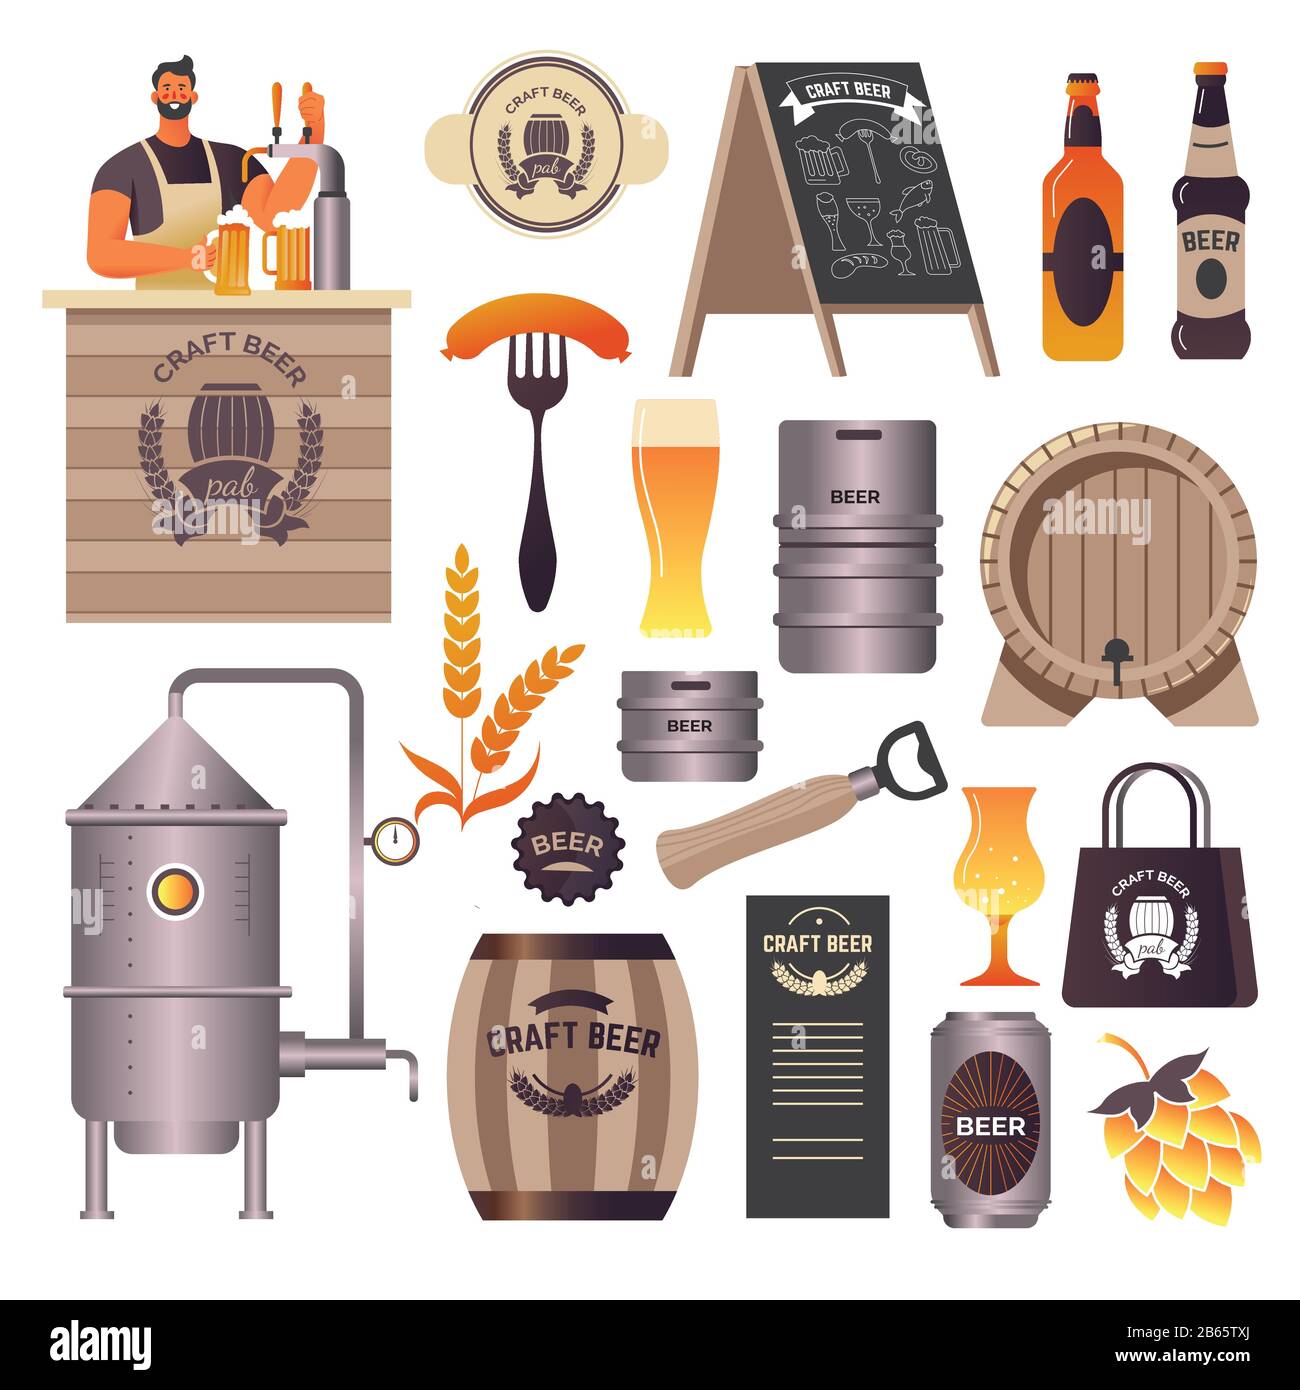 Craft beer pub, brewery and bar, bartender pouring drink Stock Vector